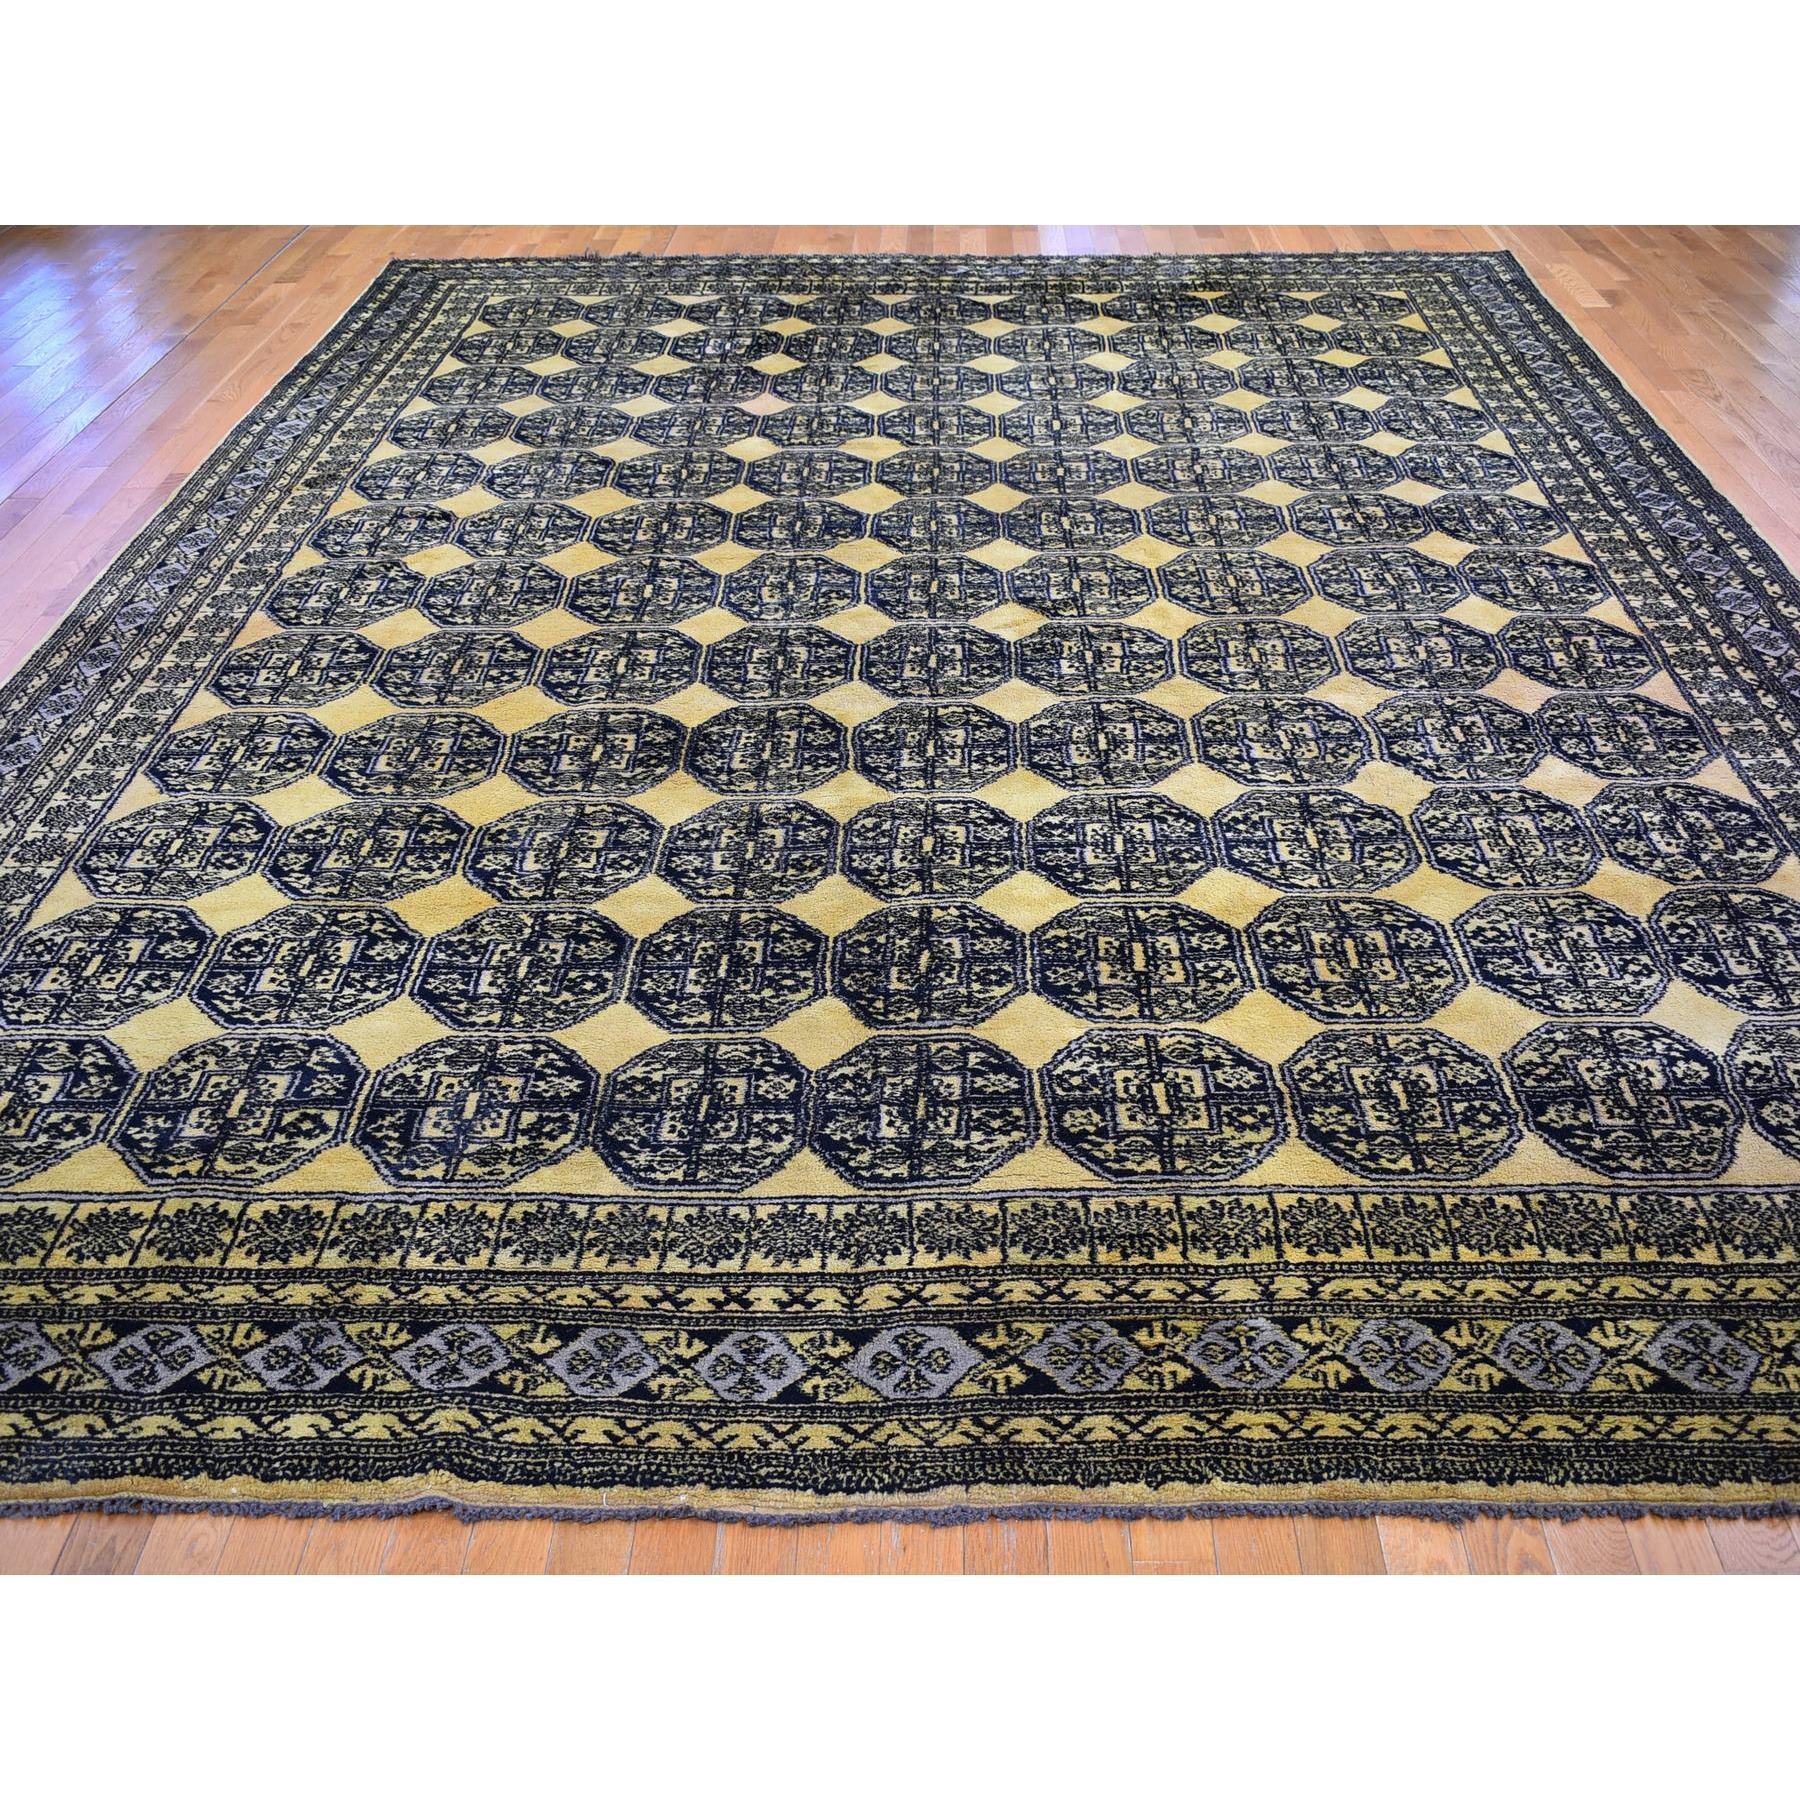 Medieval Vintage Turkish Hand Knotted Elephant Feet Design Full Pile Clean Wool Gold Rug